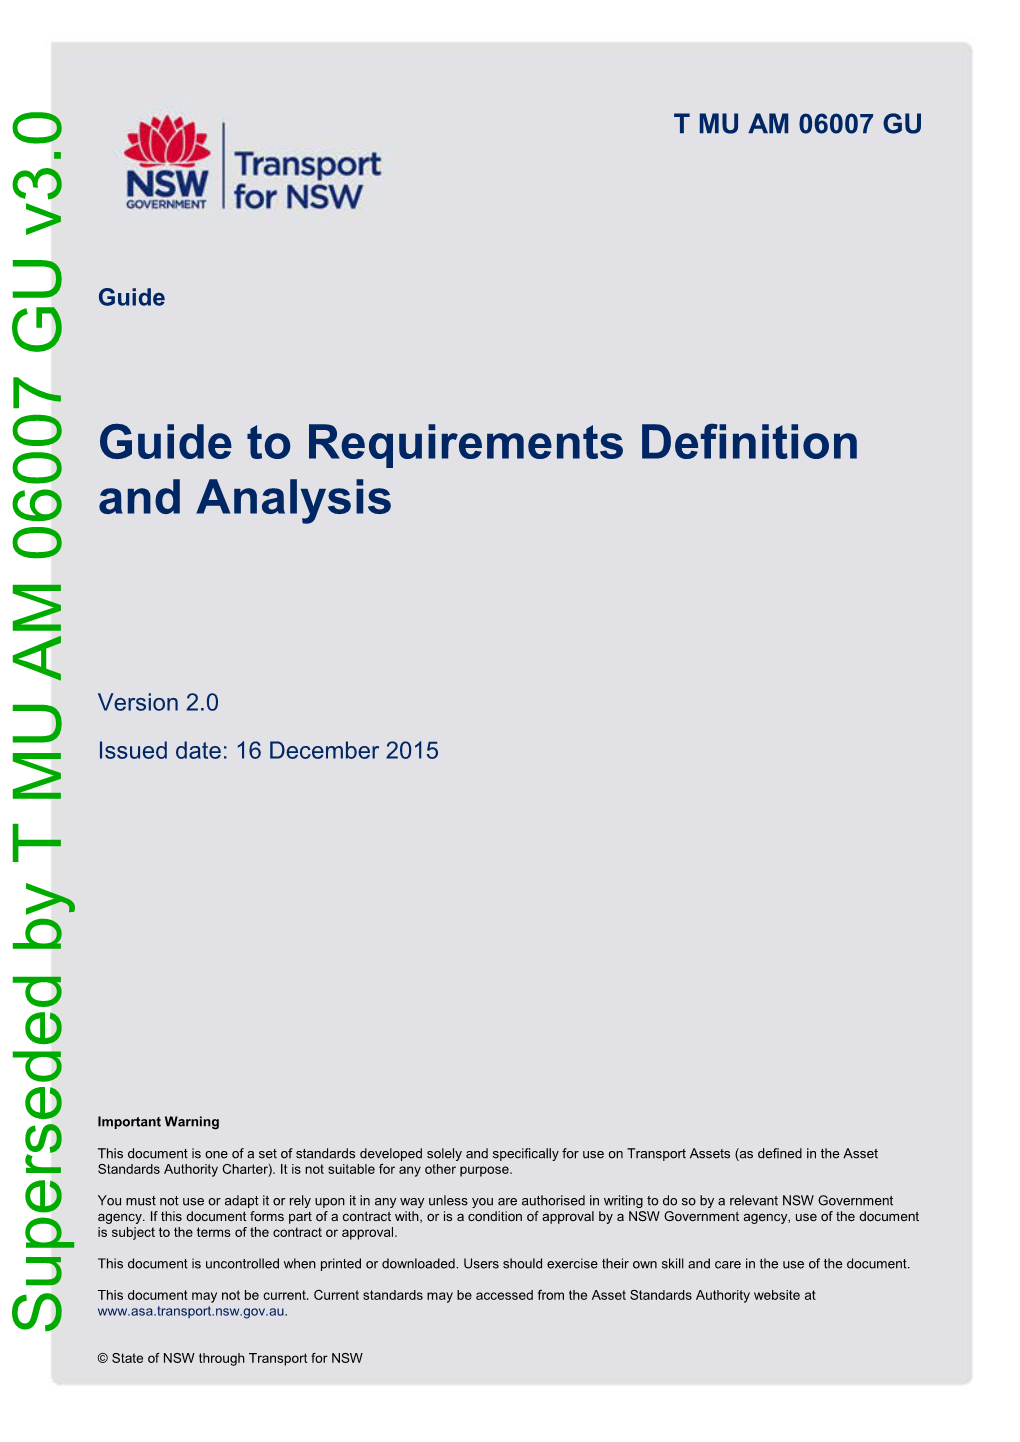 Guide to Requirements Definition and Analysis